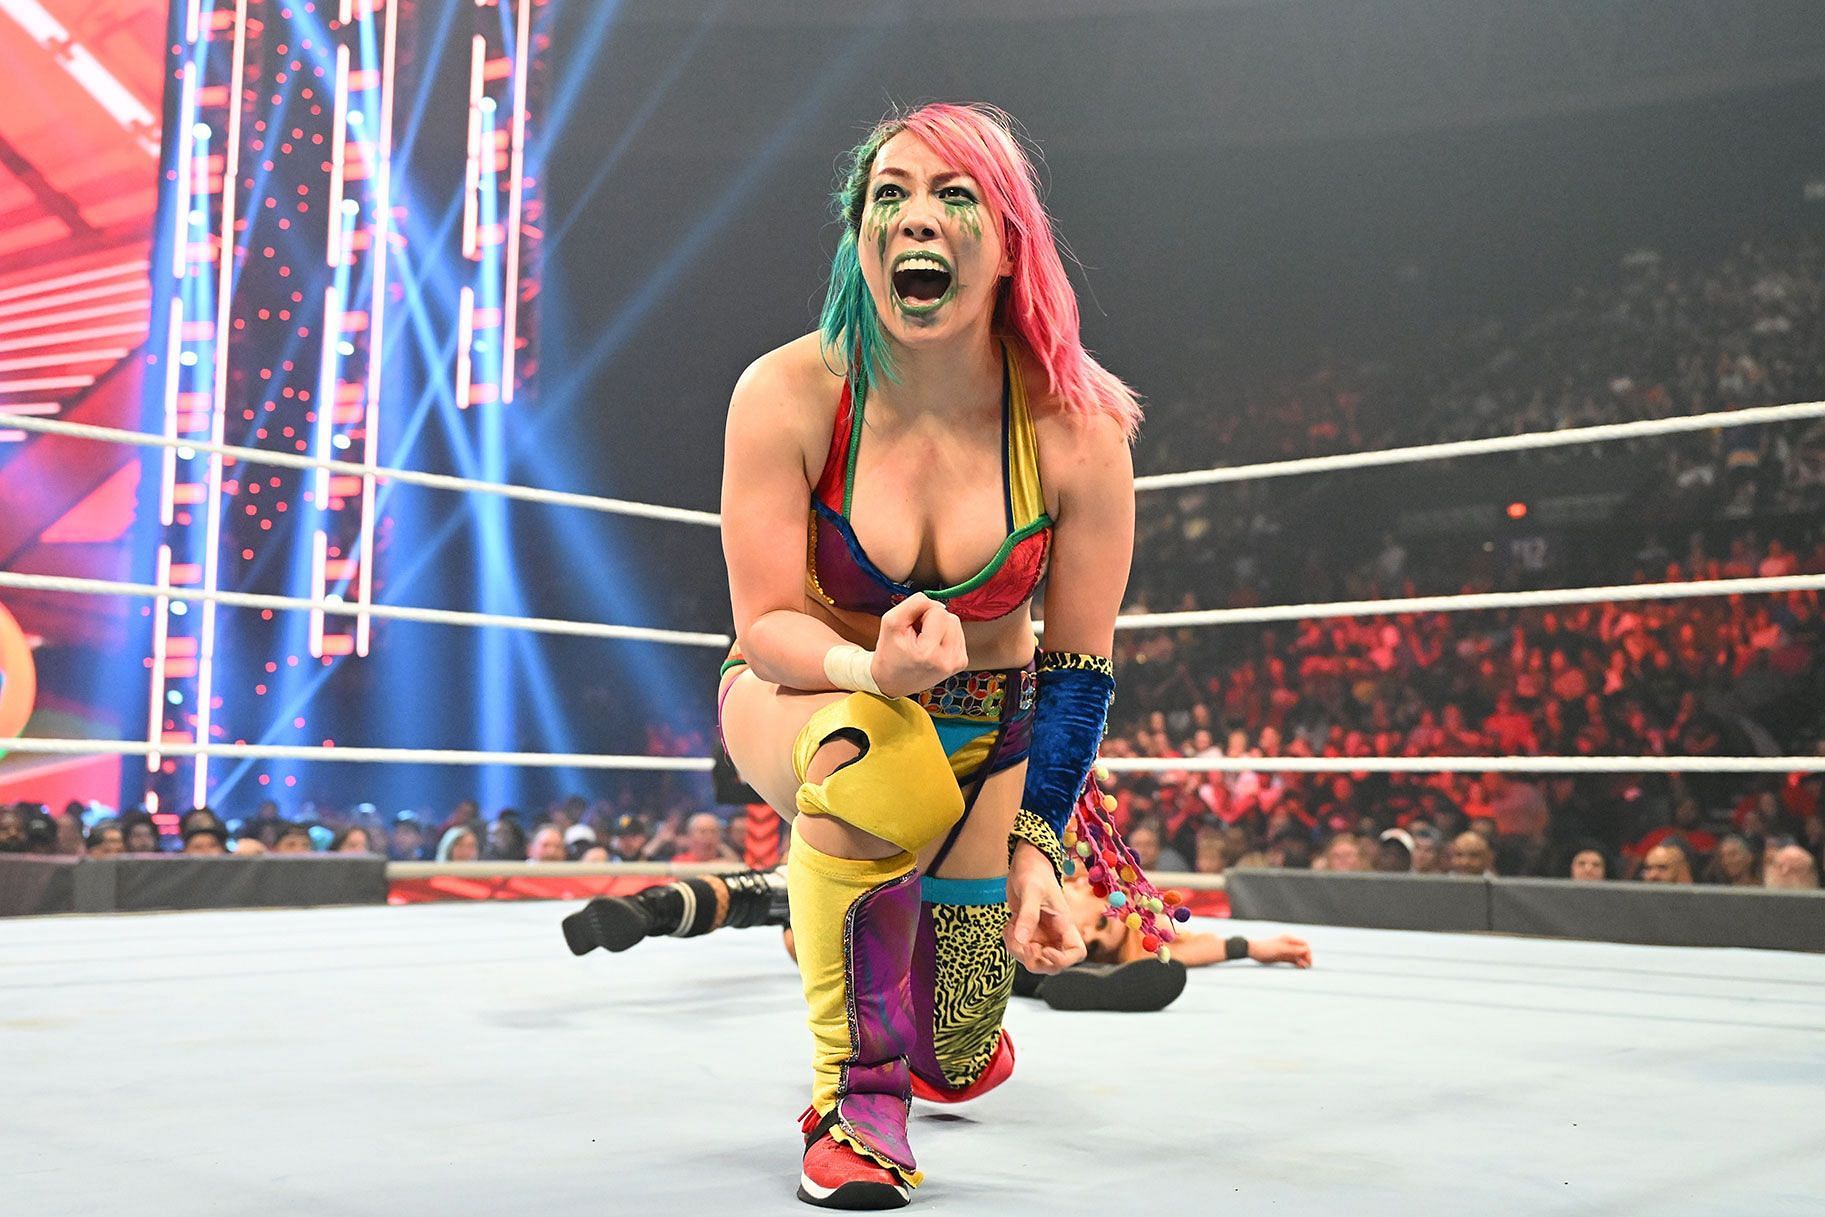 The Empress of Tomorrow is one of the best in-ring performers in WWE